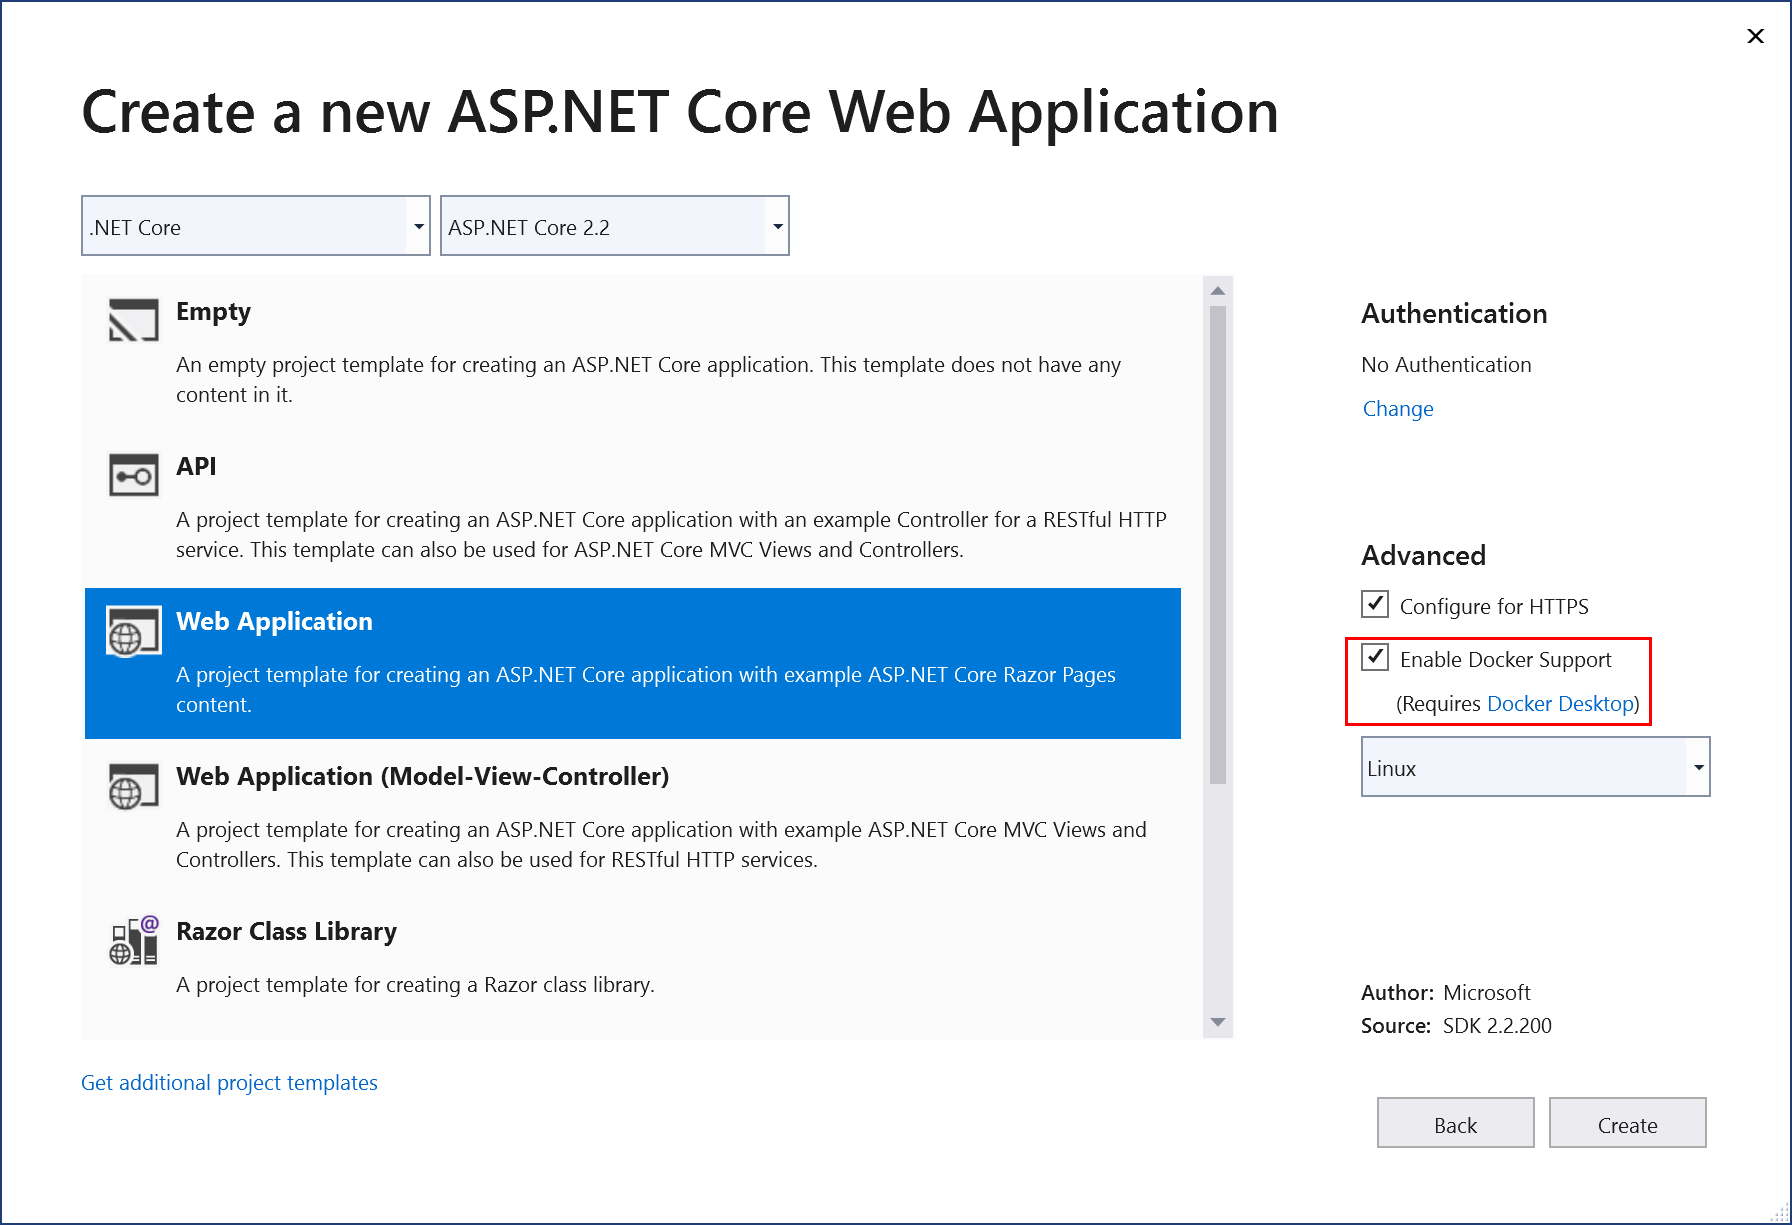 Screenshot showing how to enable Docker Support for new ASP.NET Core web app in Visual Studio.